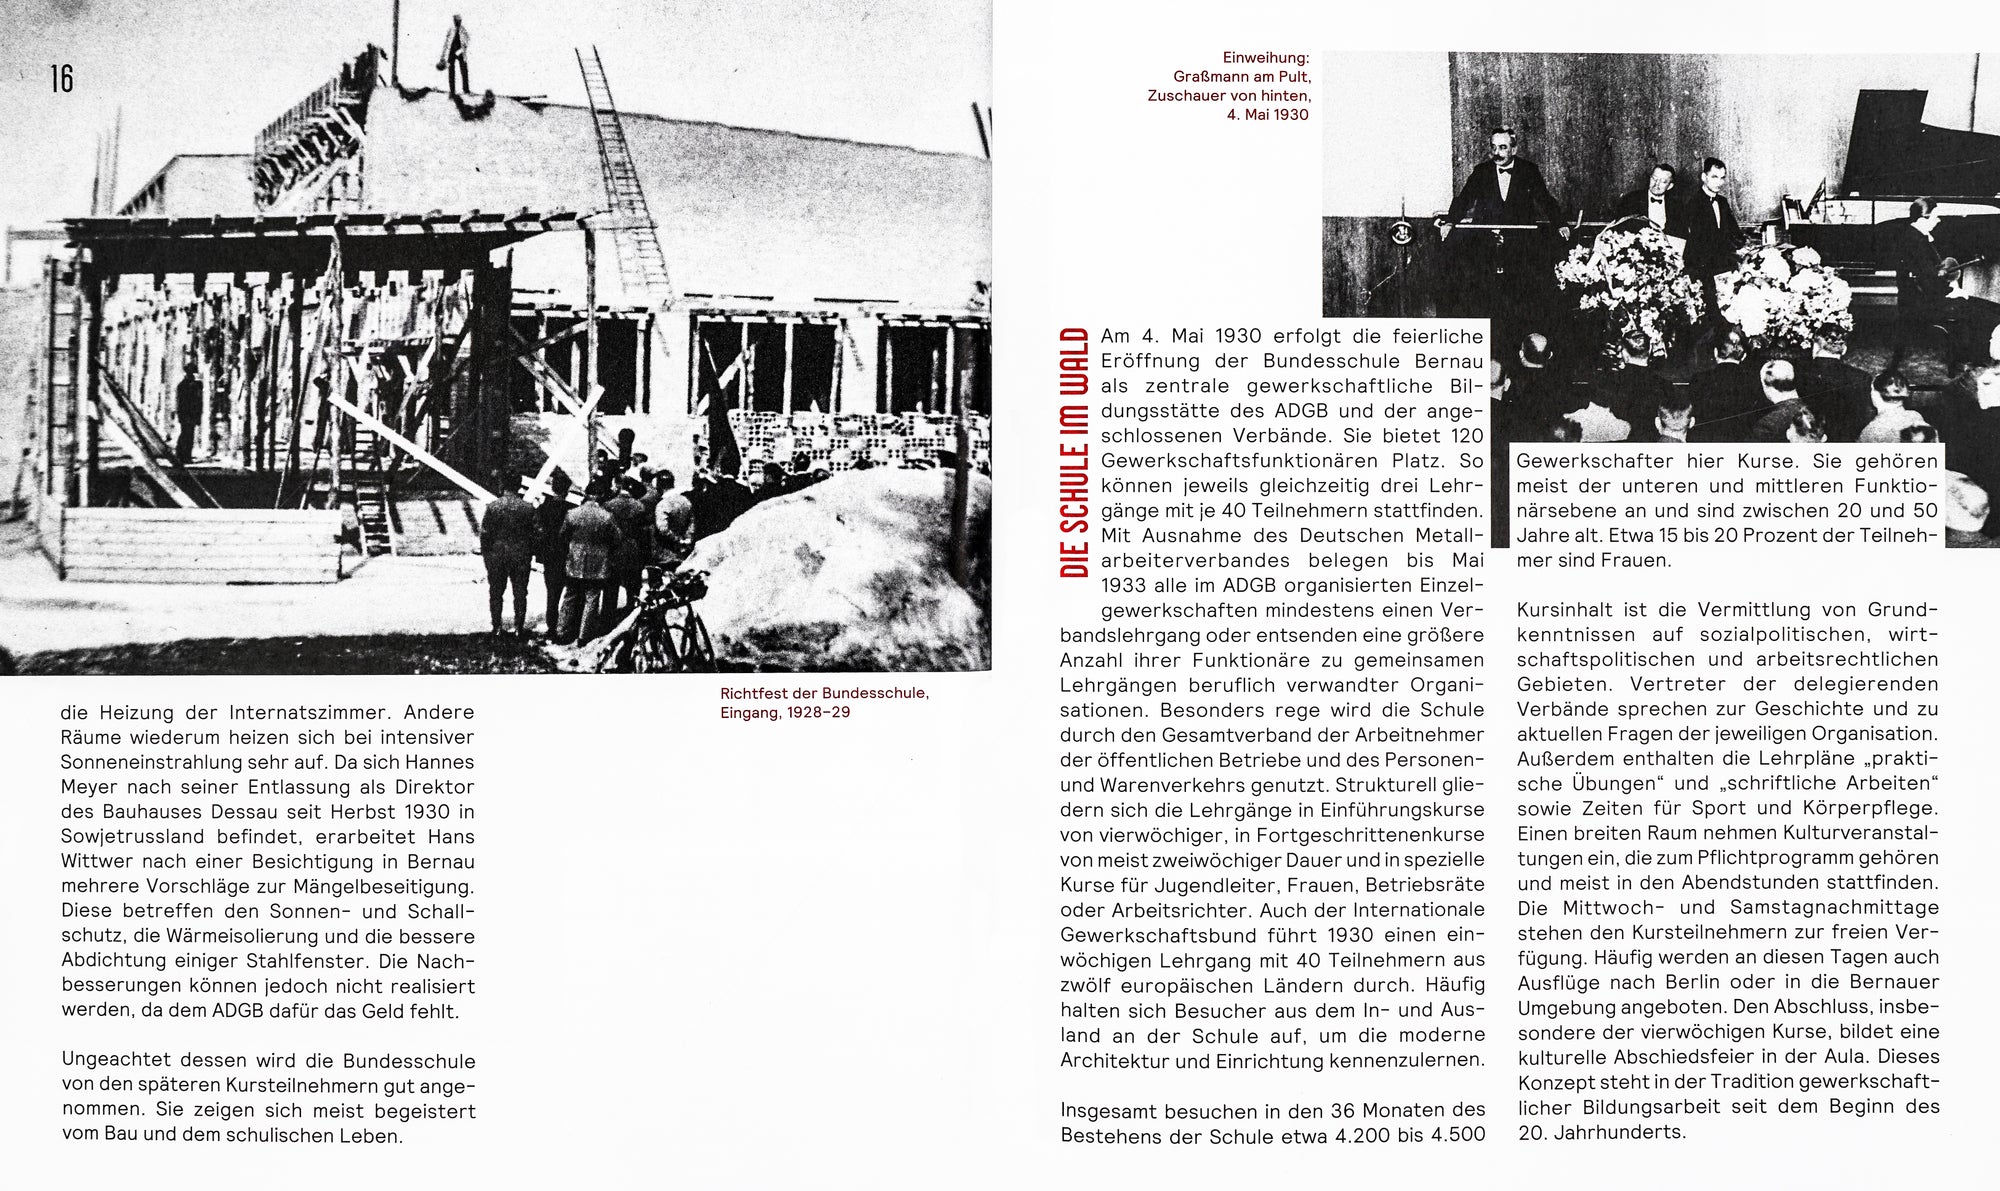 Book spread with white background. The left page’s upper half is a black and white photography of a historical construction side of a house. Below it is a short column text in black sans serif writing. The right page contains two text columns in black and white sans serif and has a small black and white photography in the upper right corner depicting a group of men in suits sitting around a table with flower bouquets and a grand piano in the background.